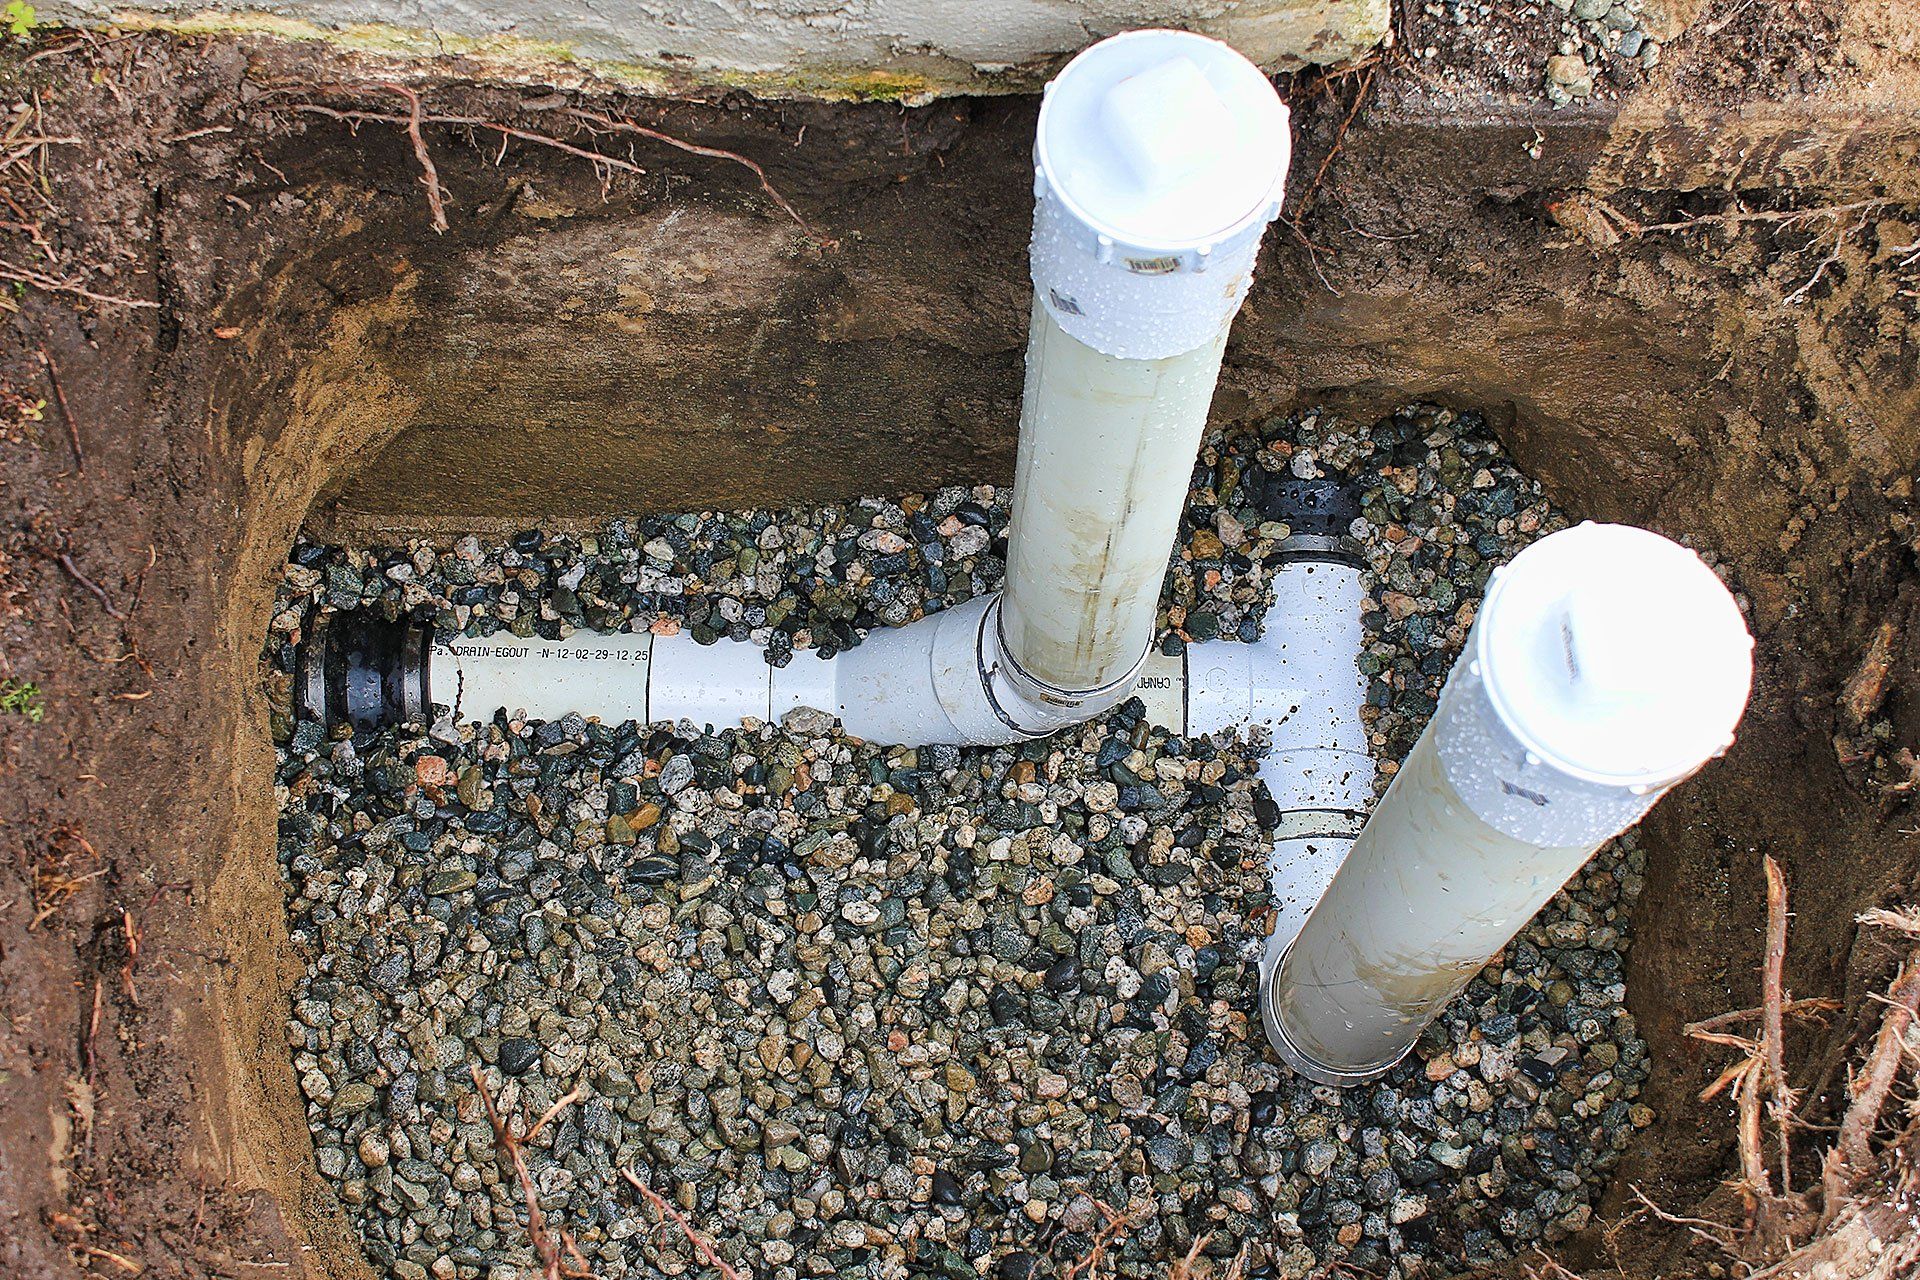 Newly installed drain pipes in an open trench with loose gravel at the bottom